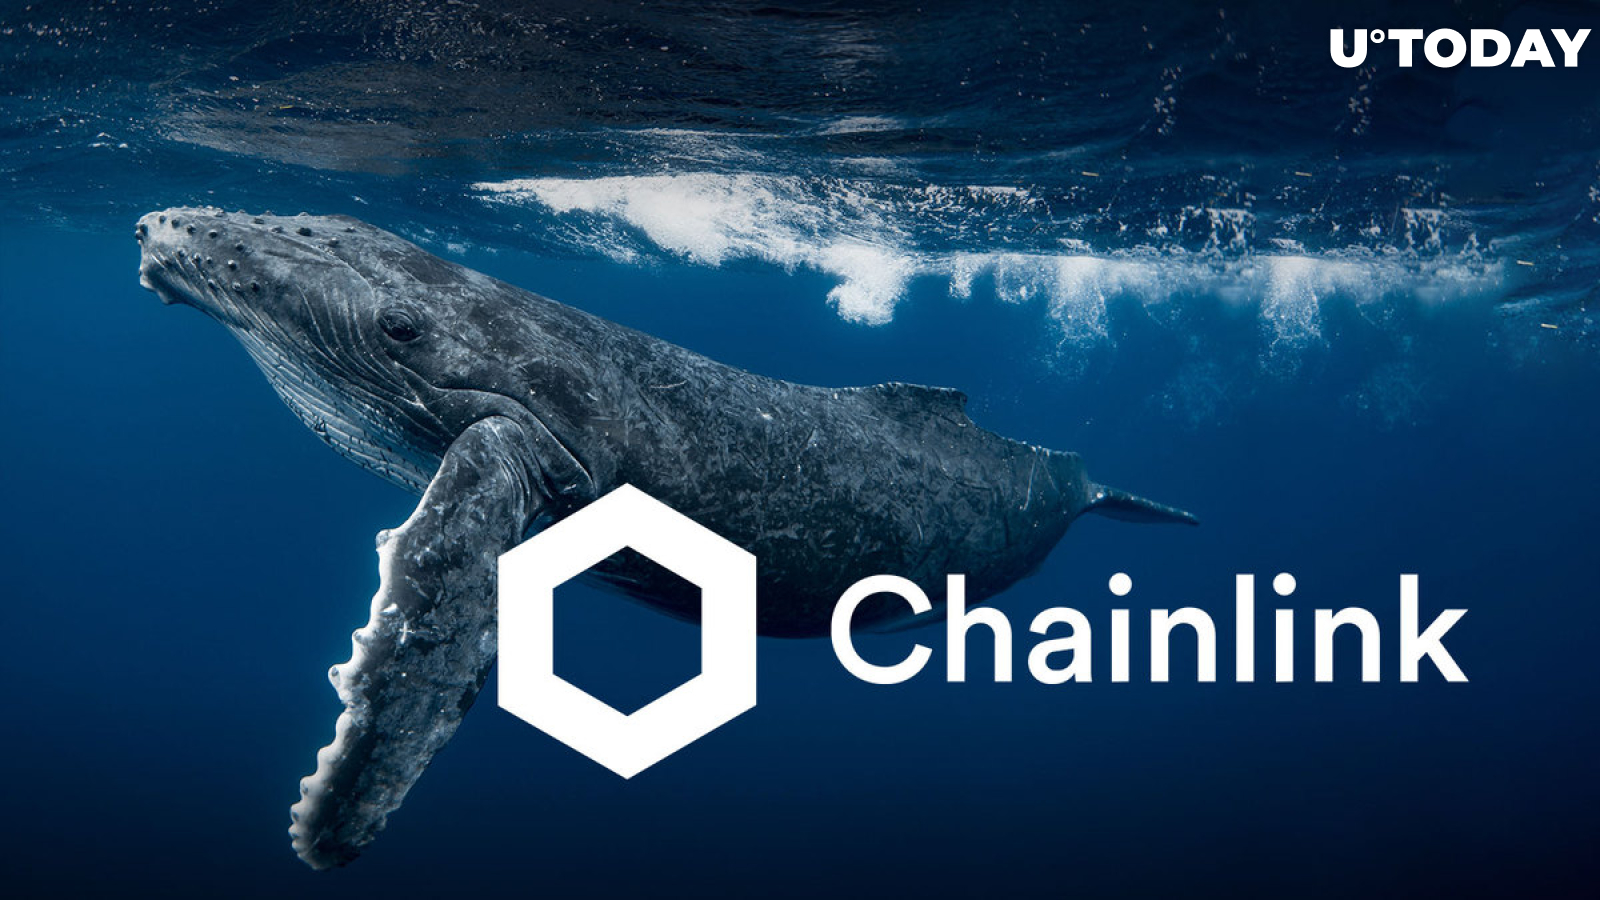 Are Whales Pushing Chainlink (LINK) Upward? Here's What Data Shows